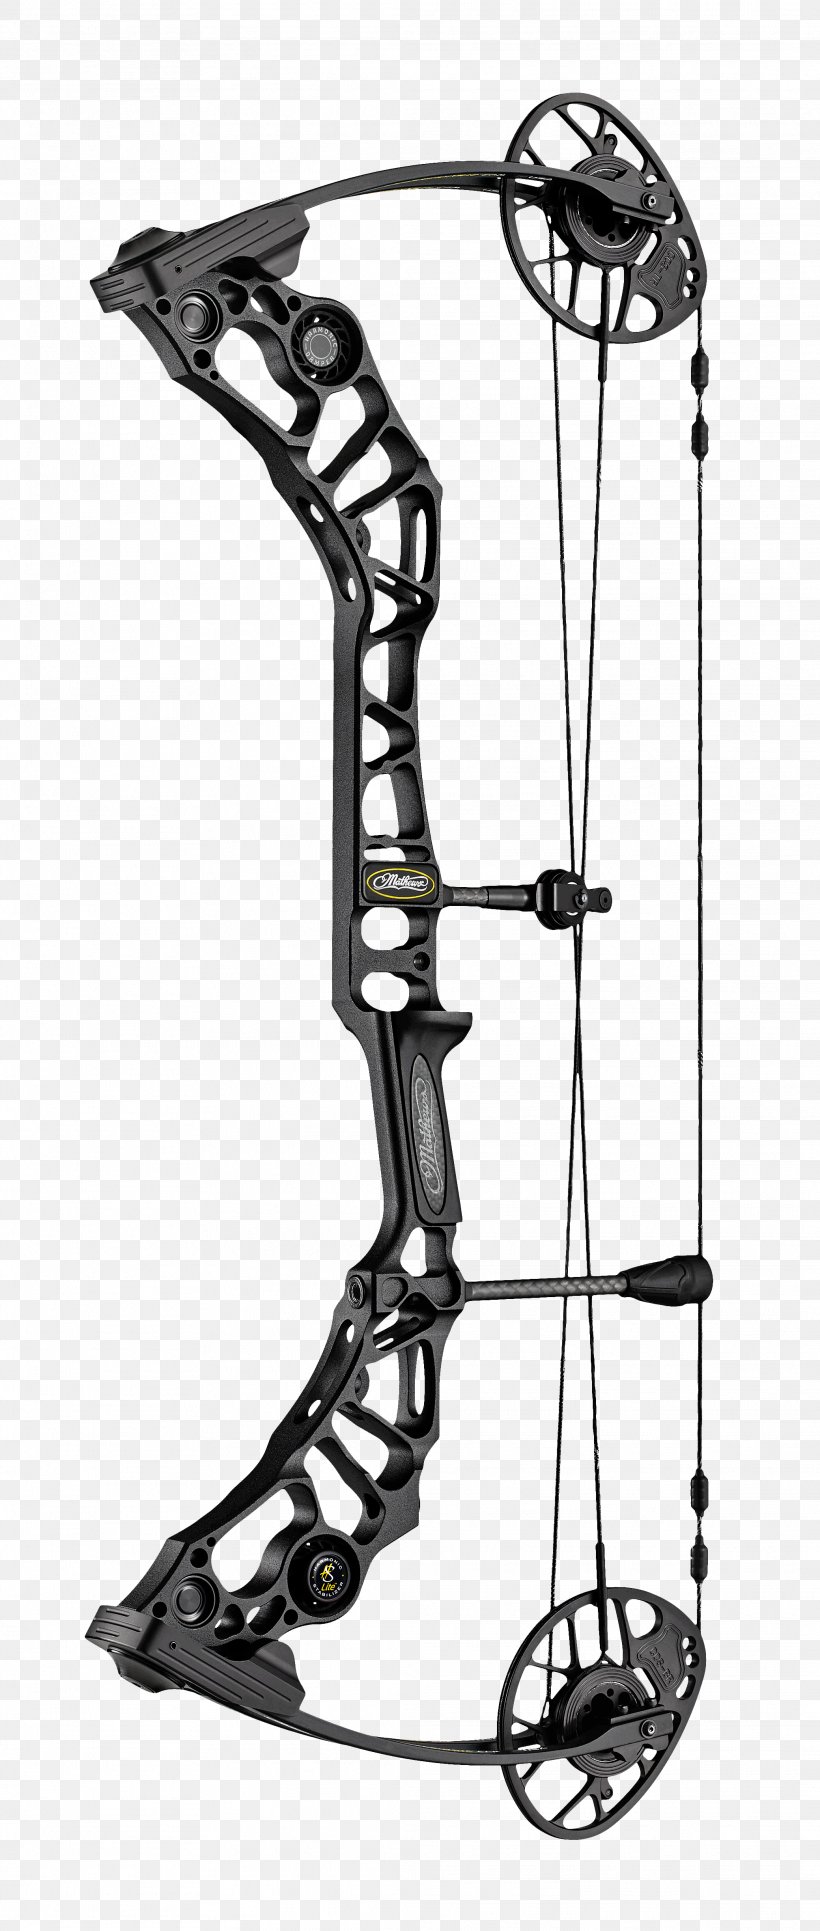 Compound Bows Bow And Arrow Mathews Archery, Inc. Bowhunting, PNG, 2079x4898px, Compound Bows, Advanced Archery, Archery, Black And White, Bow Download Free